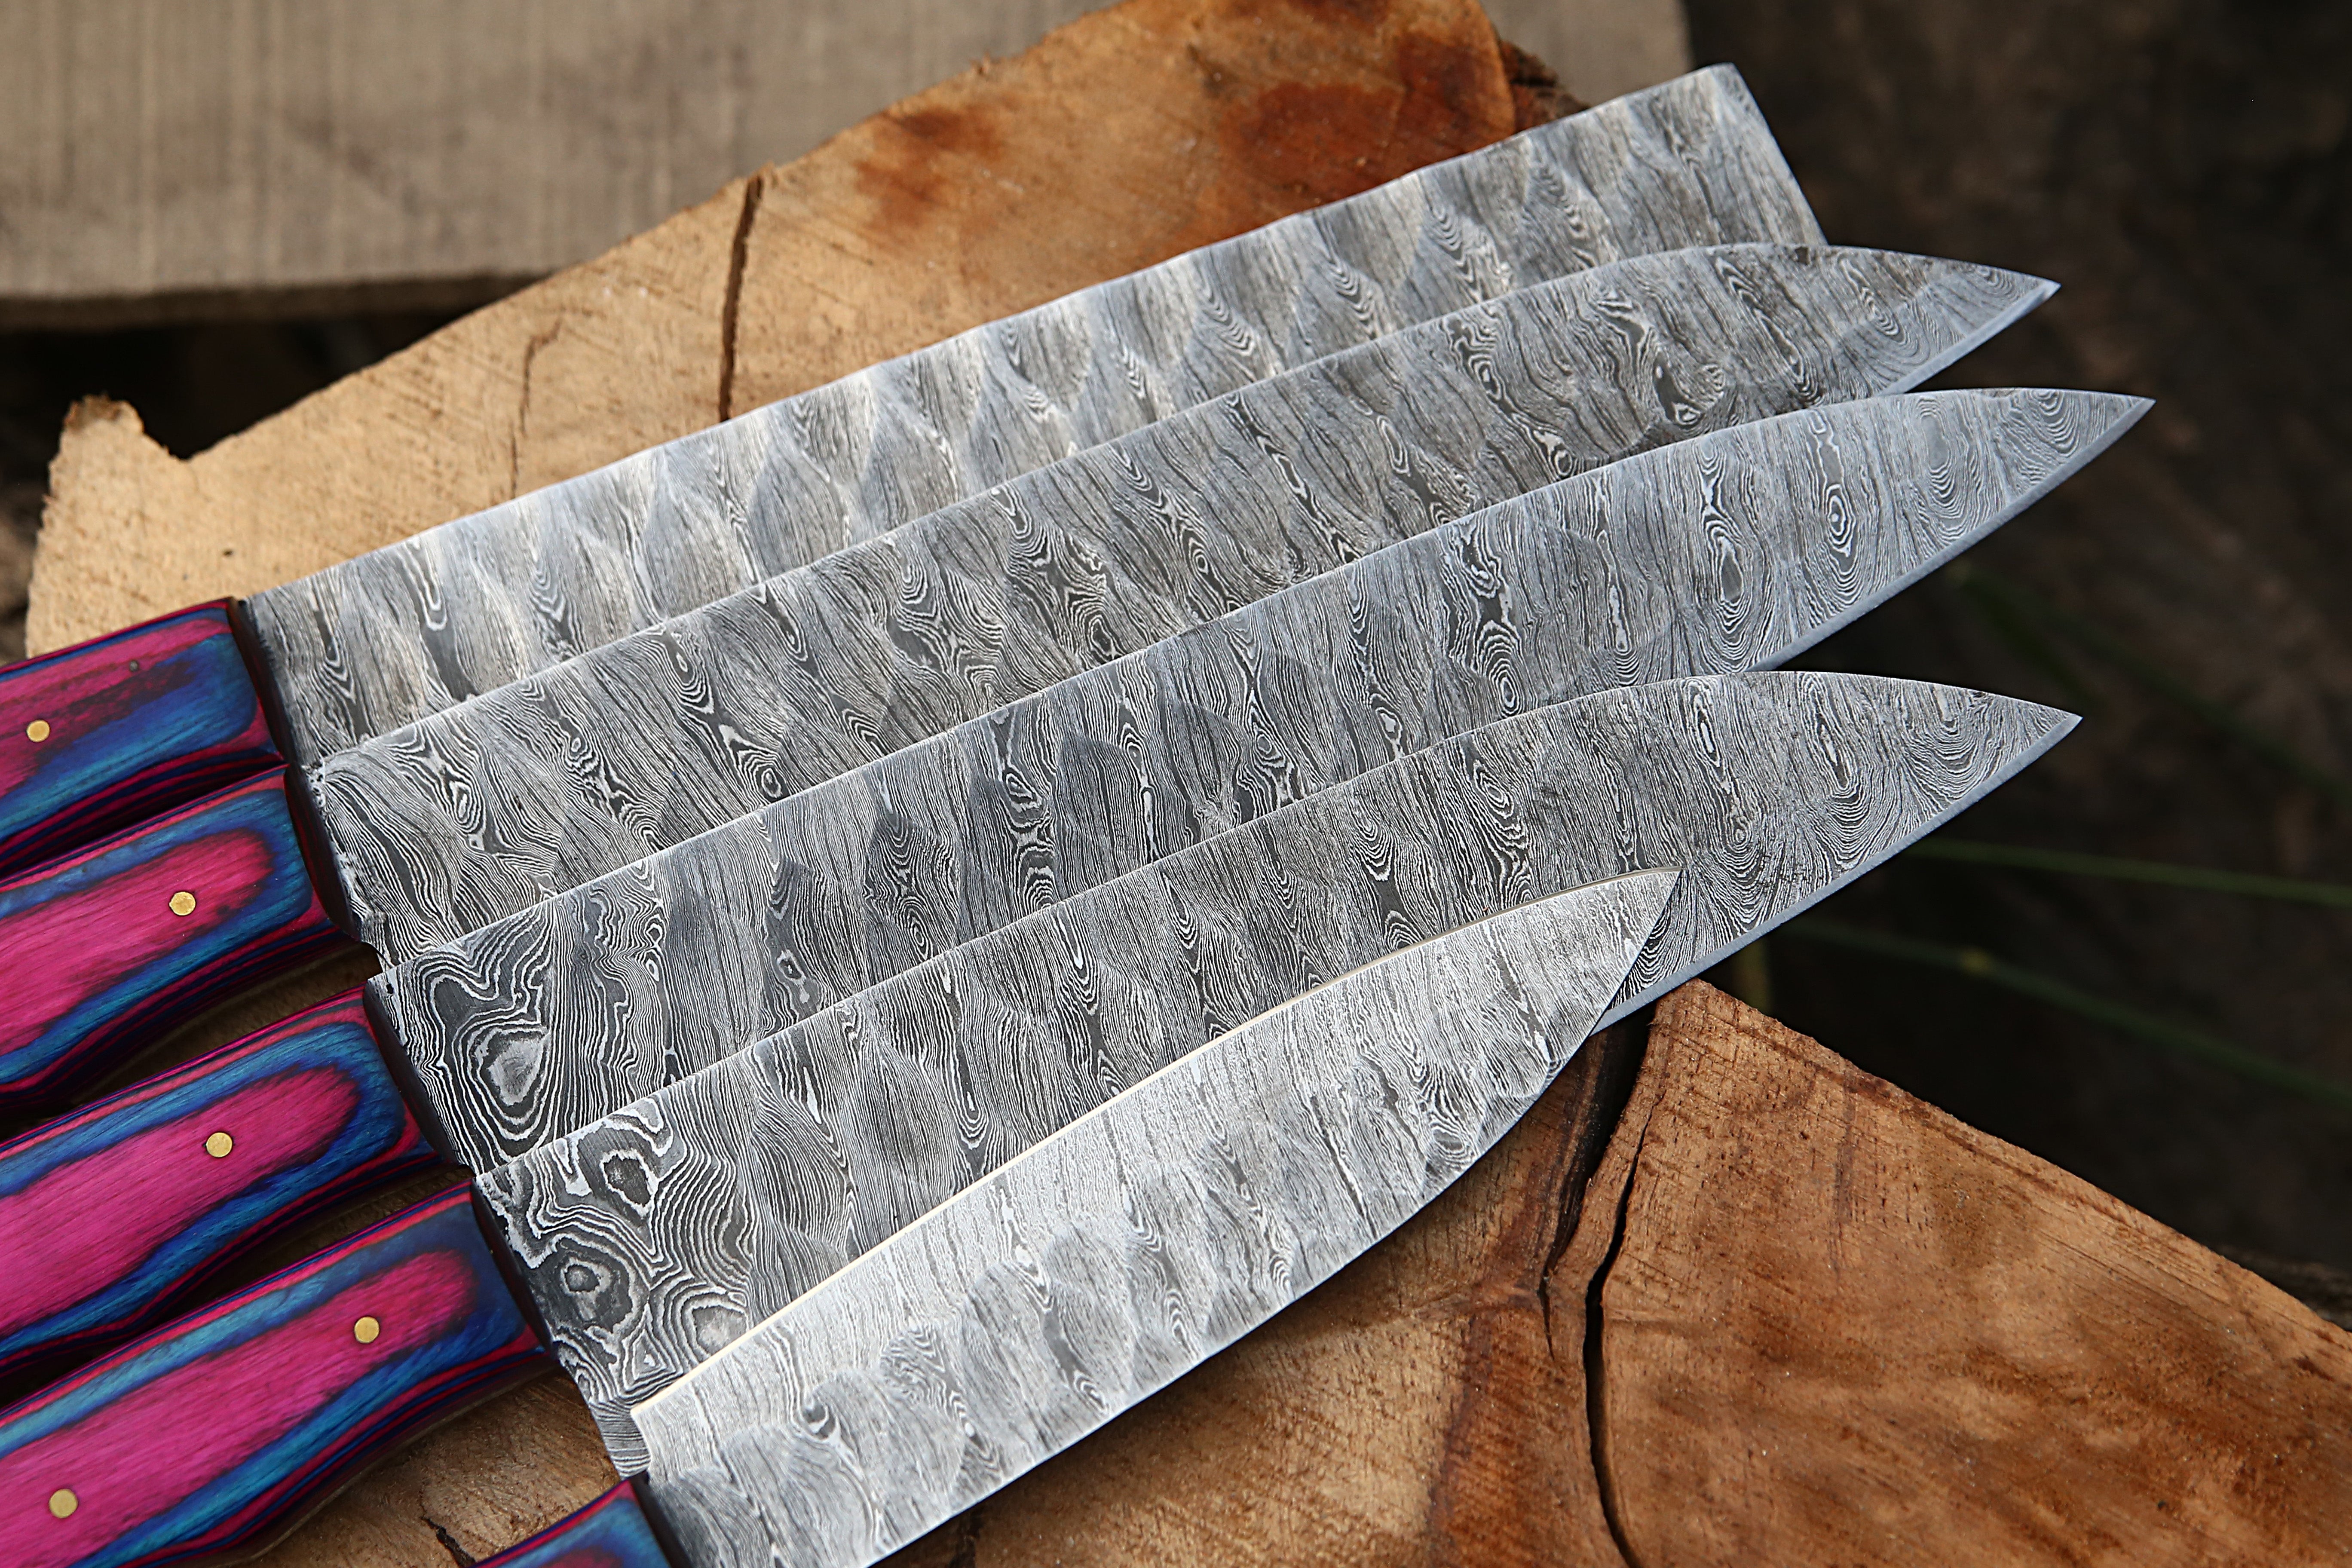 Handmade Damascus Steel Kitchen Knife Set Of 5 PCS Multi Color Dollar Handle Chef Knife With Leather Roll Kit.